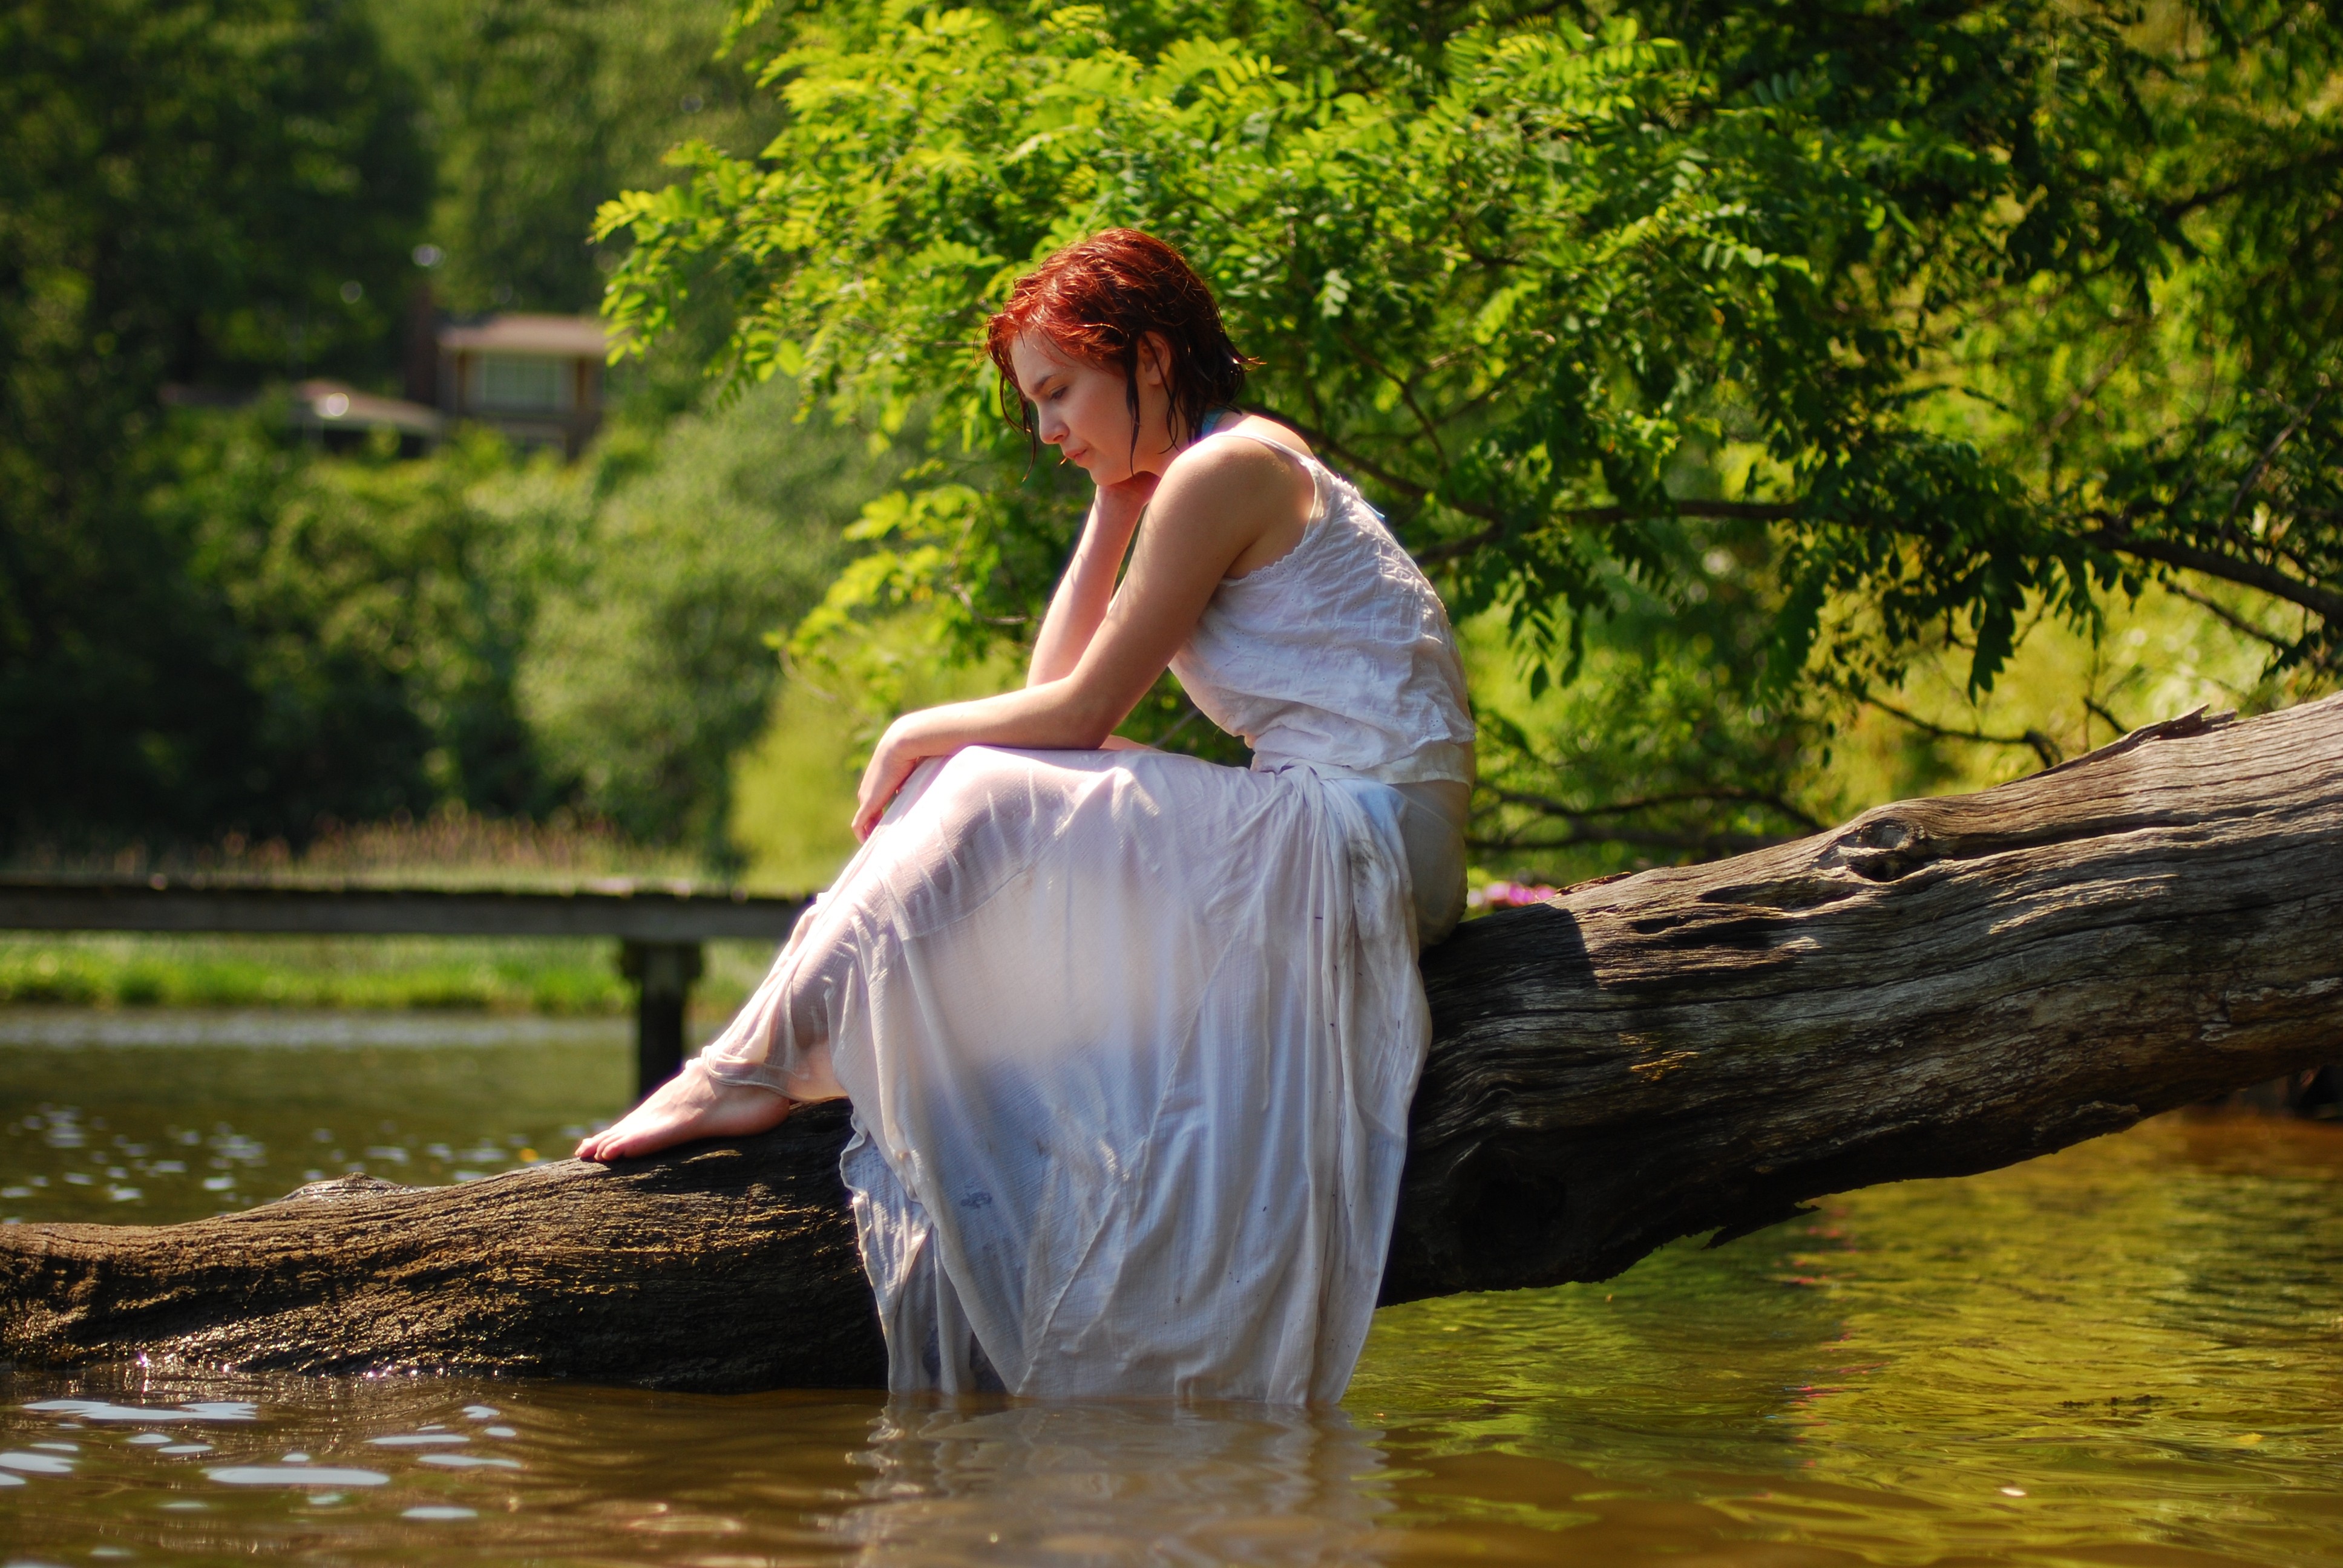 People 3872x2592 redhead women women outdoors white dress wet clothing wet hair profile see-through clothing sitting warming in sunlight barefoot log wet wood water dyed hair white clothing model